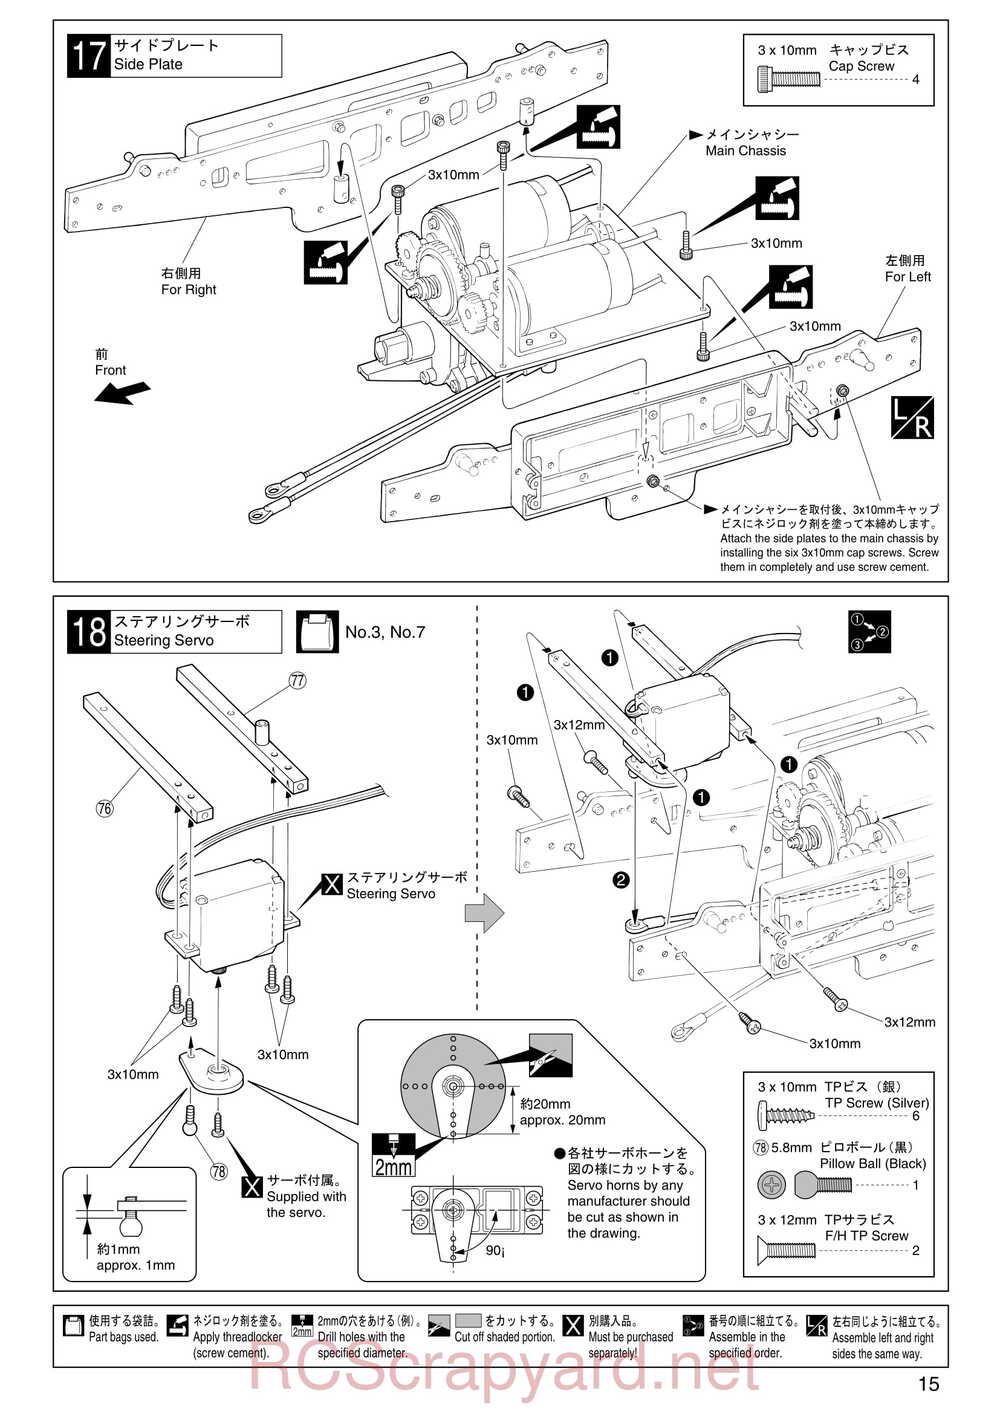 Kyosho - 30522b - Twin-Forcec-SP - Manual - Page 15